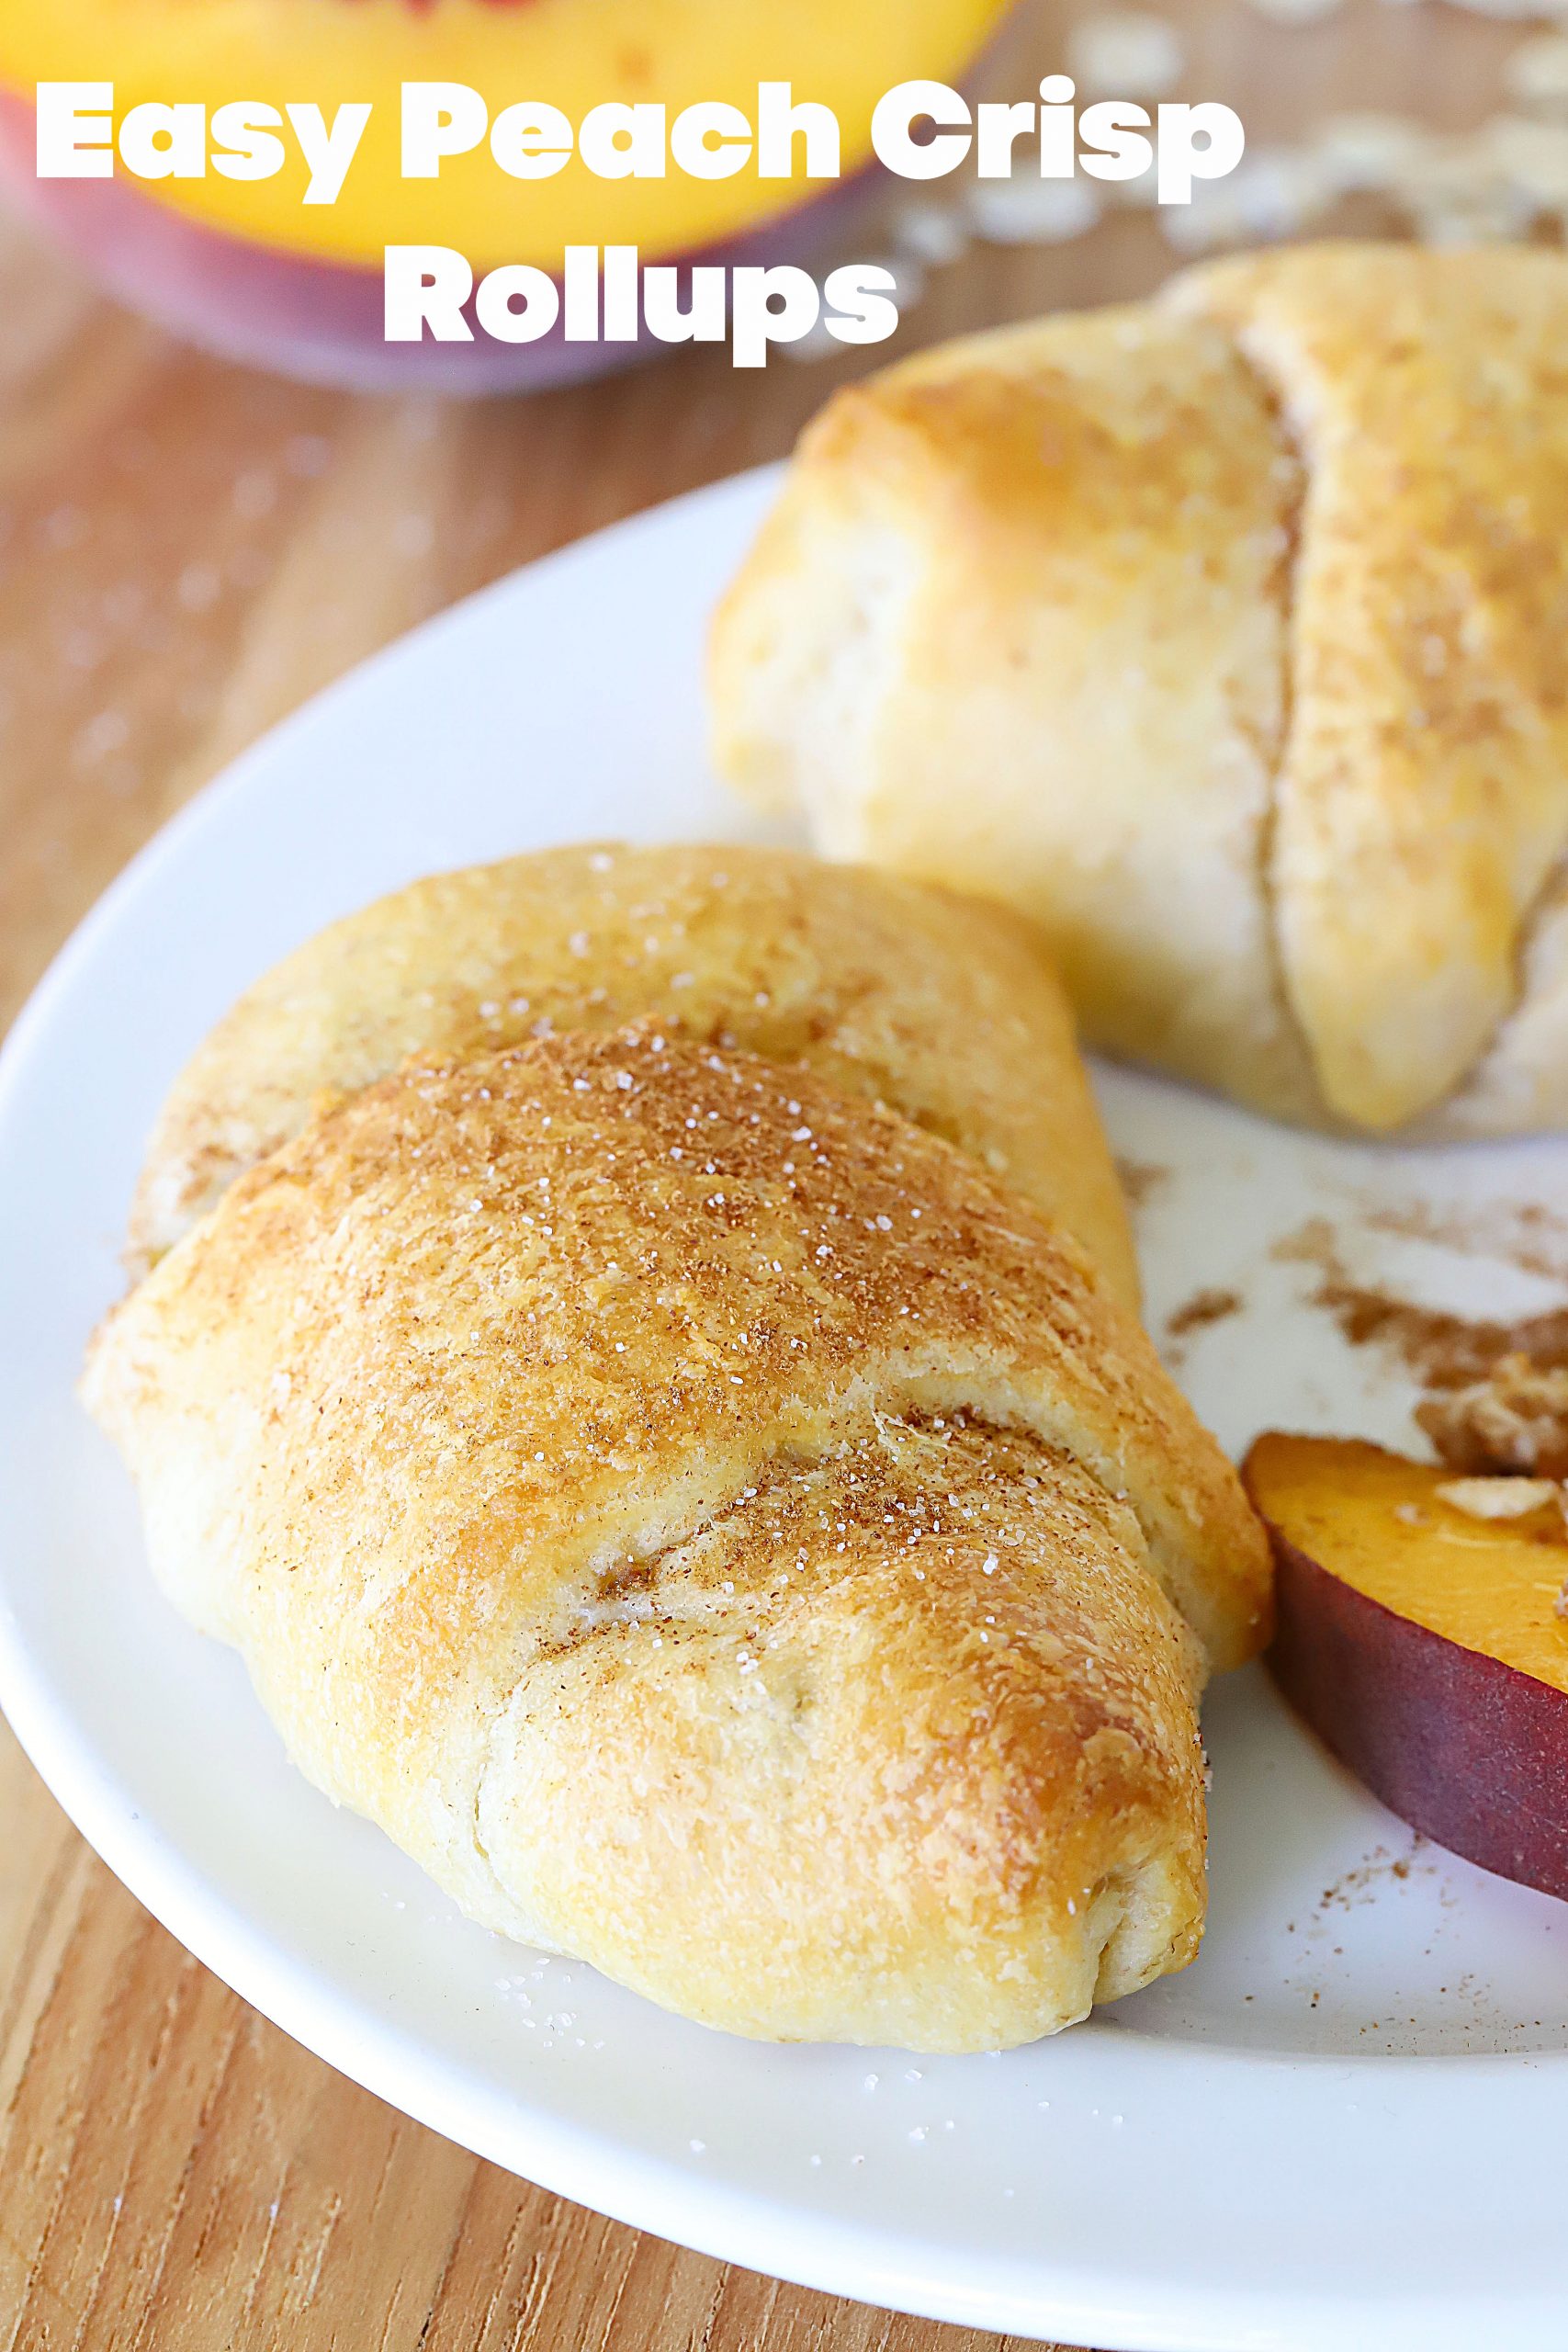 If you love Peach Crisp but don't want to make a whole pan of it, you need to try these Easy Peach Crisp Rollups! Minimal ingredients, easy to make and incredibly delicious! They're the perfect portion controlled dessert! #dessert #peaches #crisp #easydessert #fallfood #yummyhealthyeasy via @jennikolaus